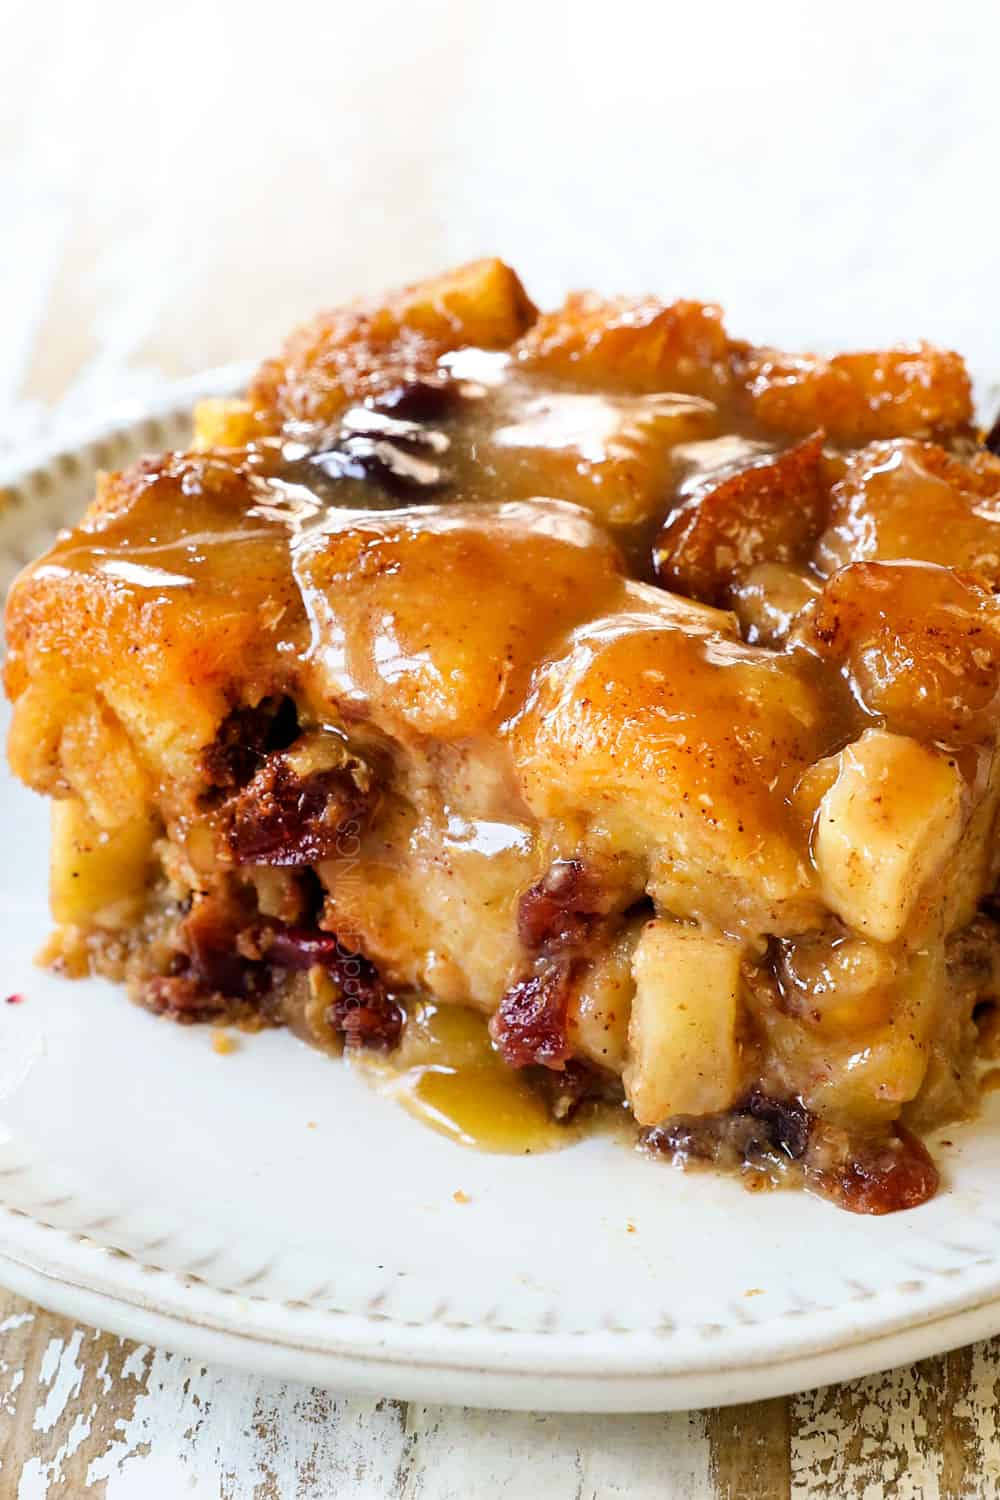 AWESOME Birthday Cake Bread Pudding!! - YouTube